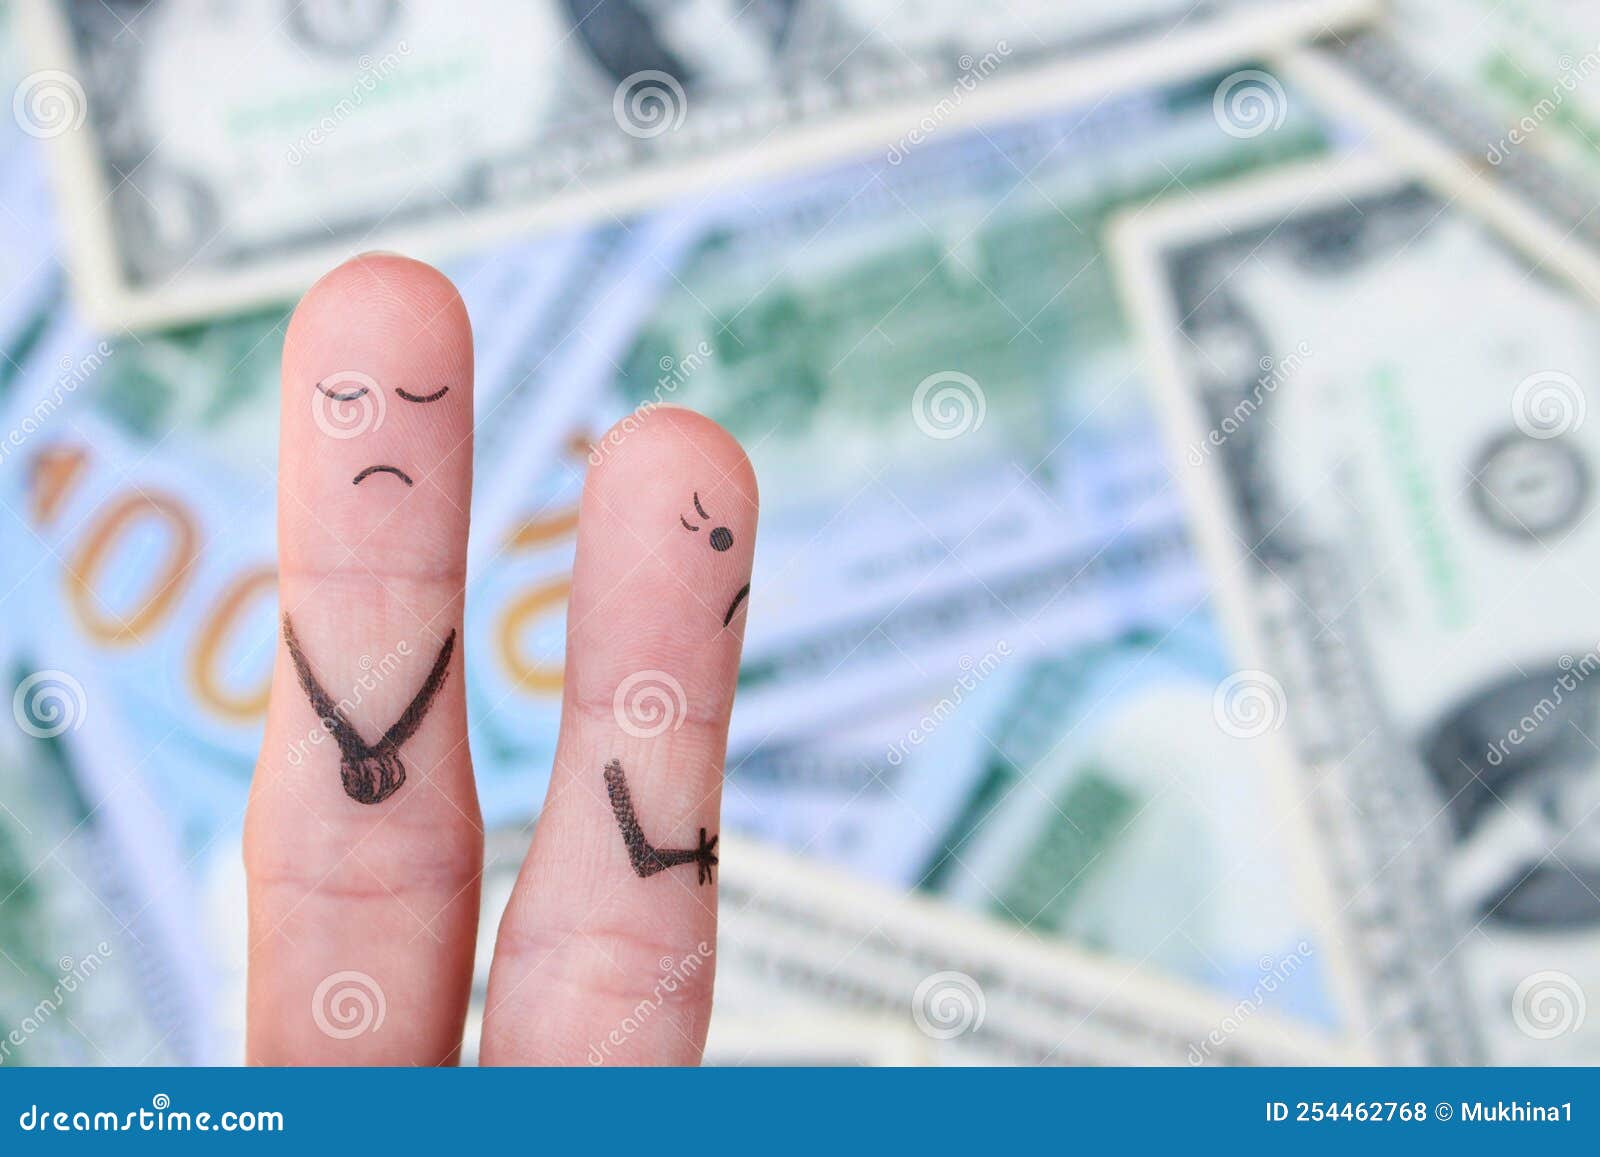 fingers art of a woman leaves a man because he earns little